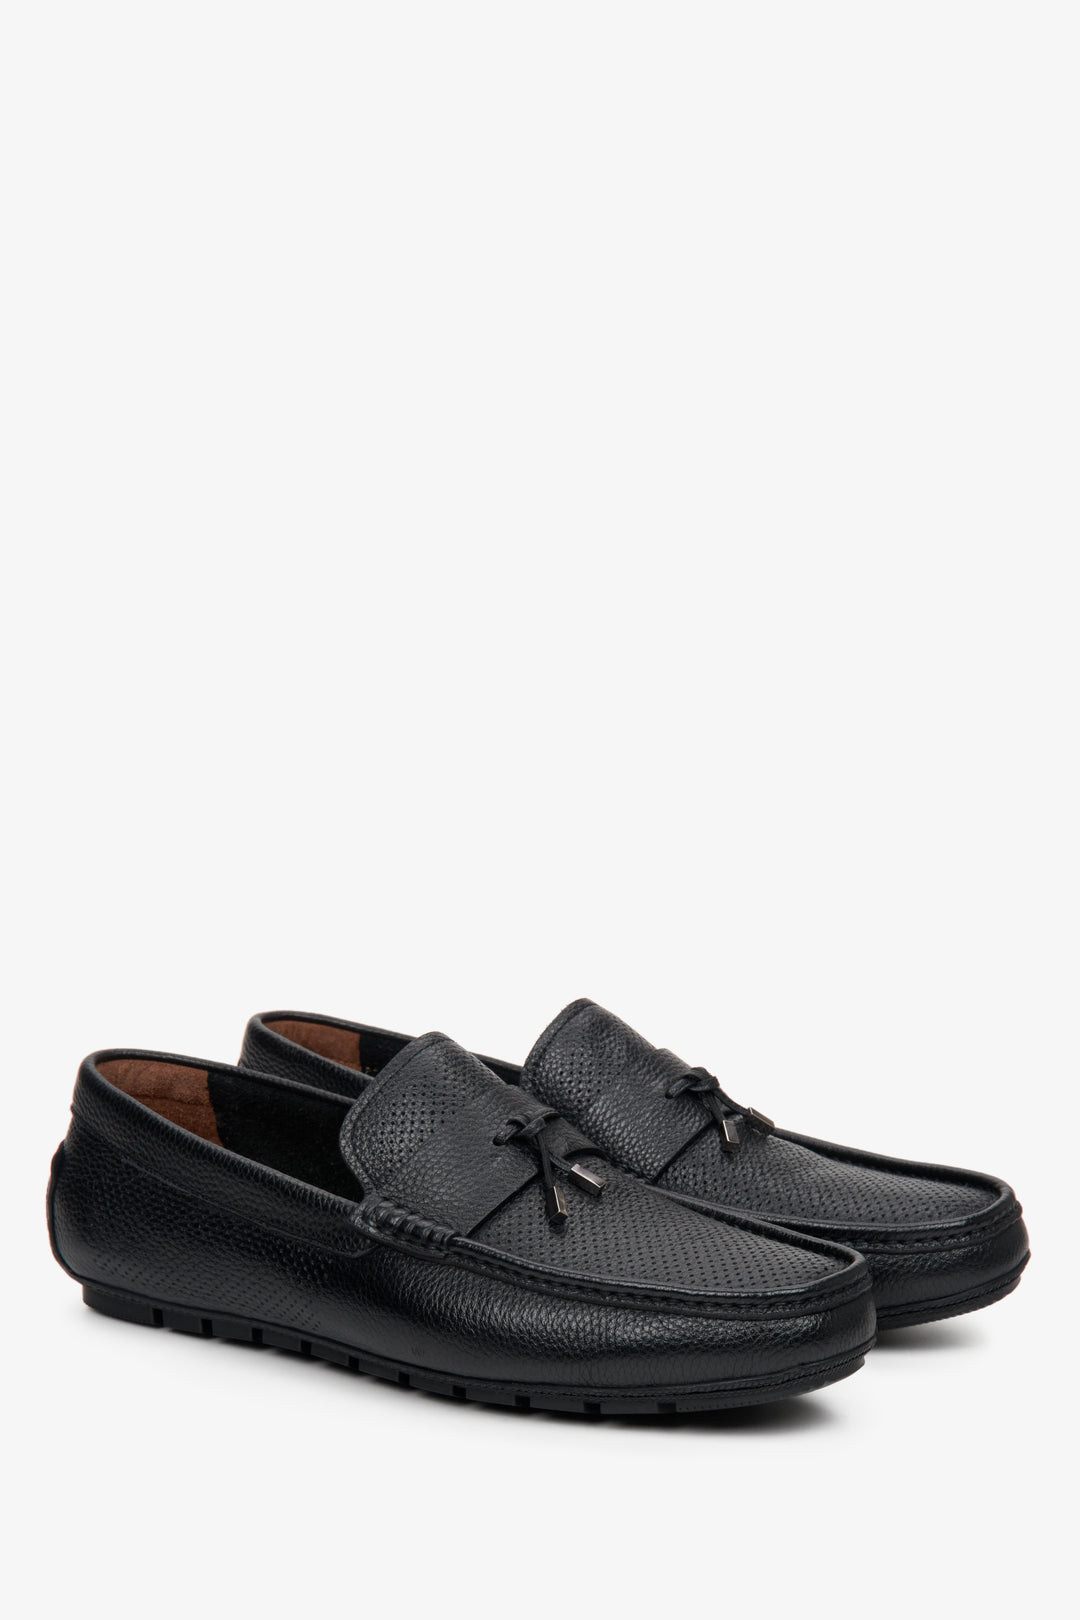 Estro men's black loafers made of genuine leather - presentation of the toe and side seam of the shoeю